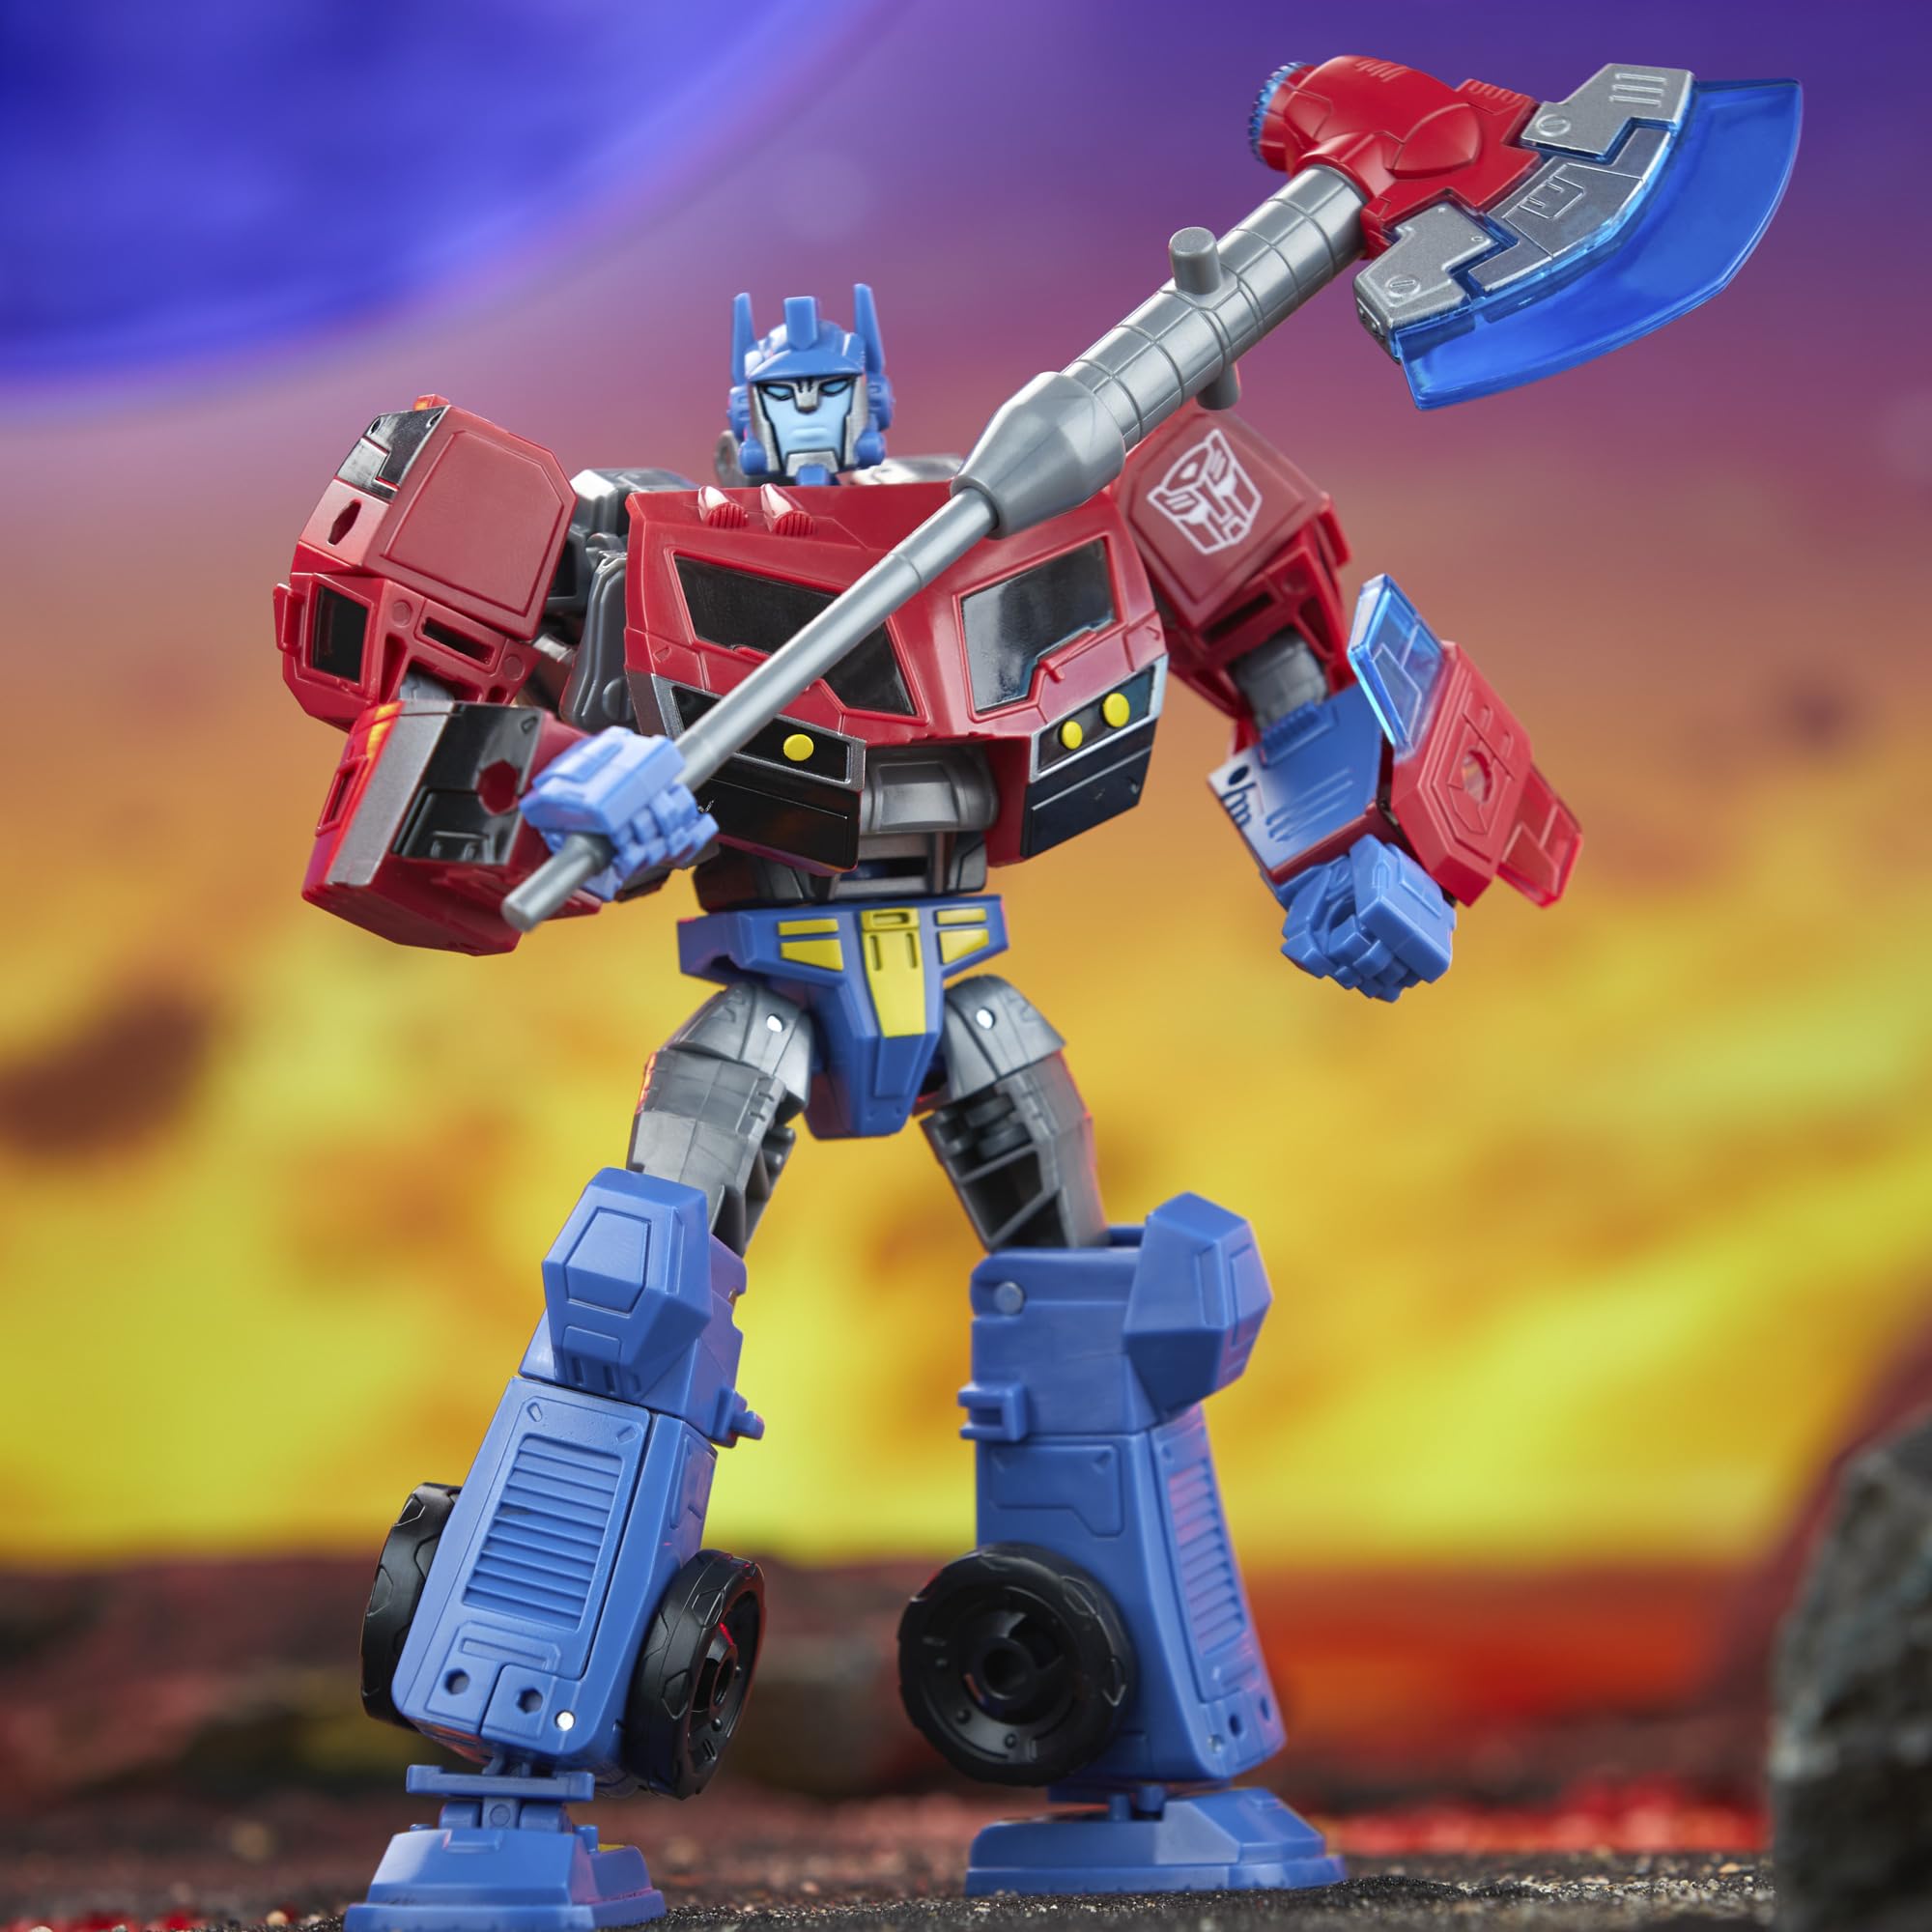 Transformers Legacy United Voyager Class Animated Universe Optimus Prime, 7-Inch Converting Action Figure, 8+